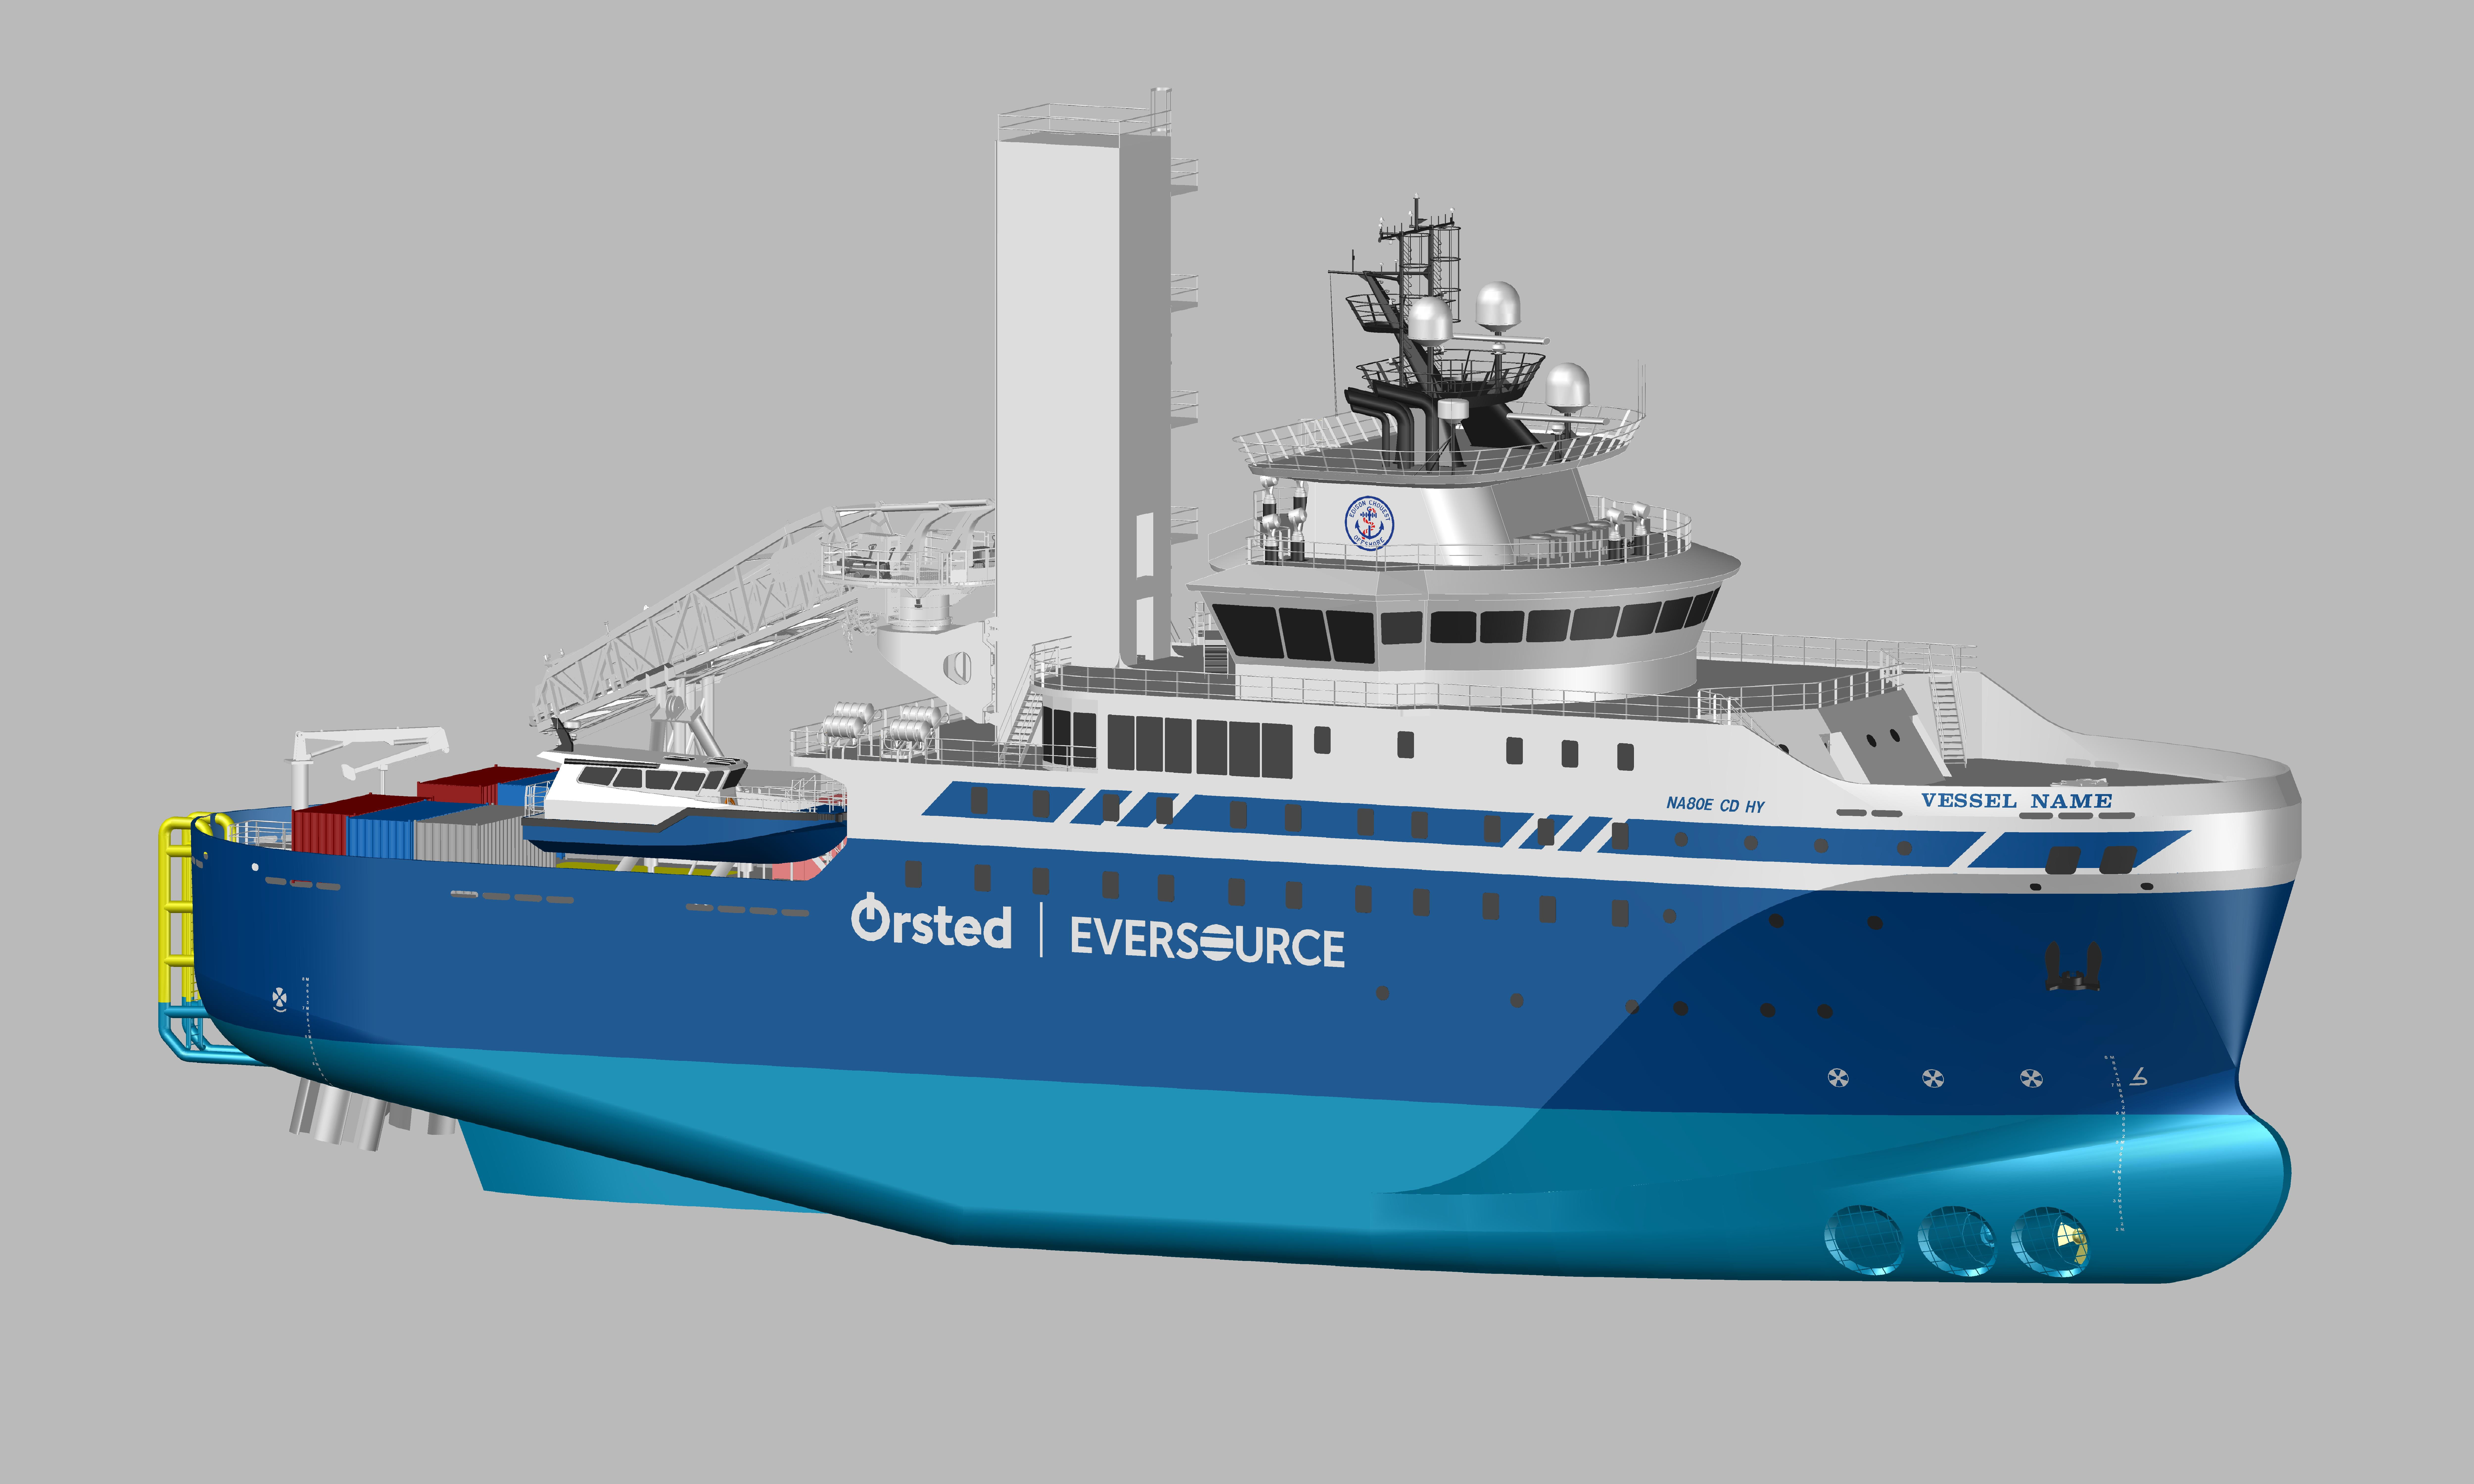 Chouest Offshore Charter Agreement with Orsted and Eversource